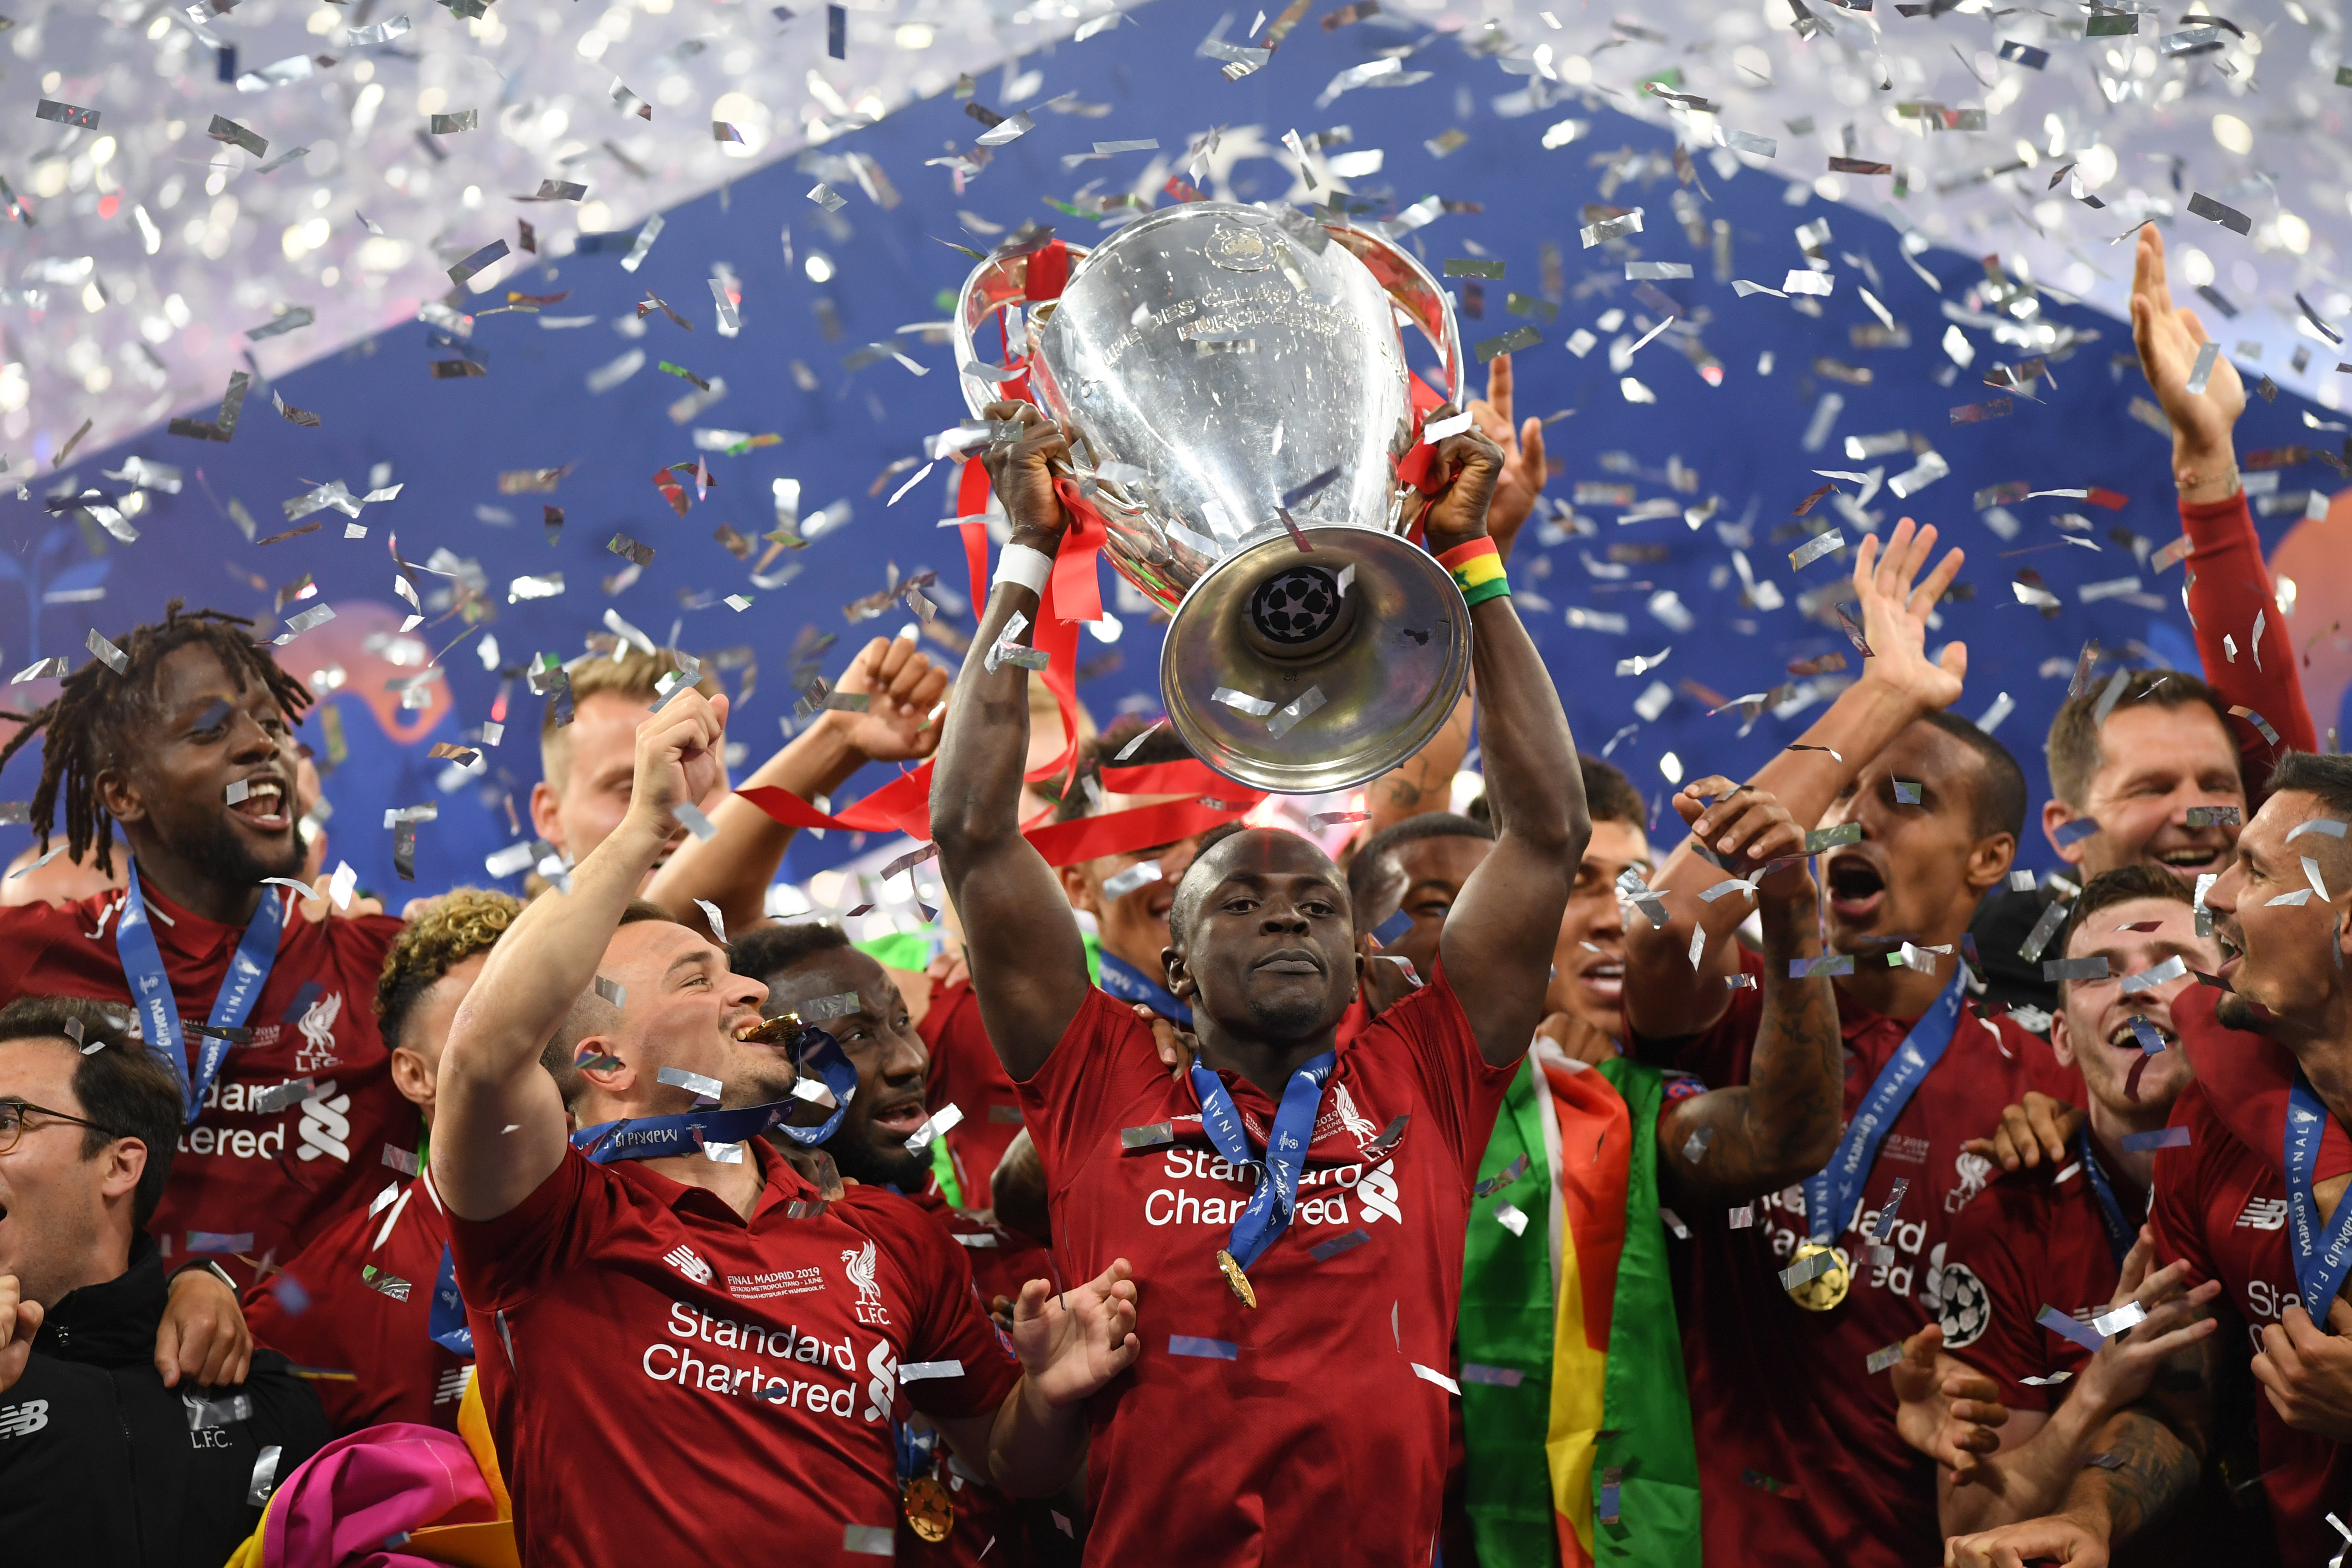 MADRID, SPAIN - JUNE 01: Sadio Mane of Liverpool celebrates with the Champions League Trophy after winning the UEFA Champions League Final between Tottenham Hotspur and Liverpool at Estadio Wanda Metropolitano on June 01, 2019 in Madrid, Spain. (Photo by Matthias Hangst/Getty Images)